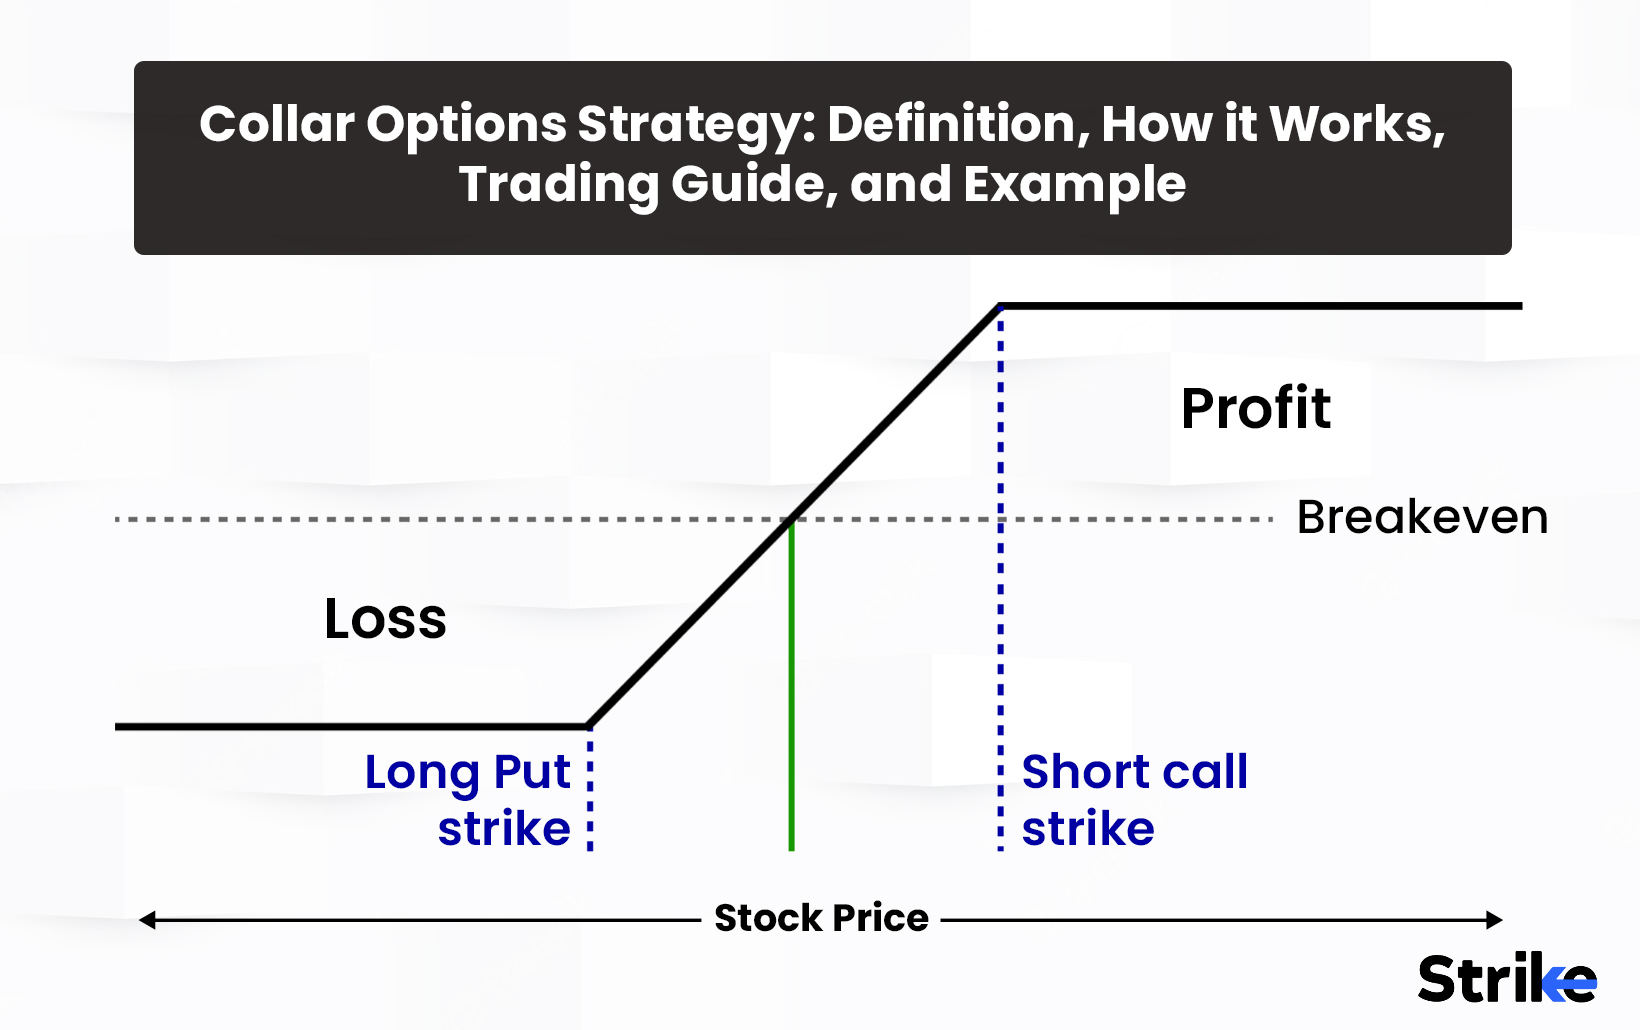 Collar Options Strategy: Definition, How it Works, Trading Guide, and Example